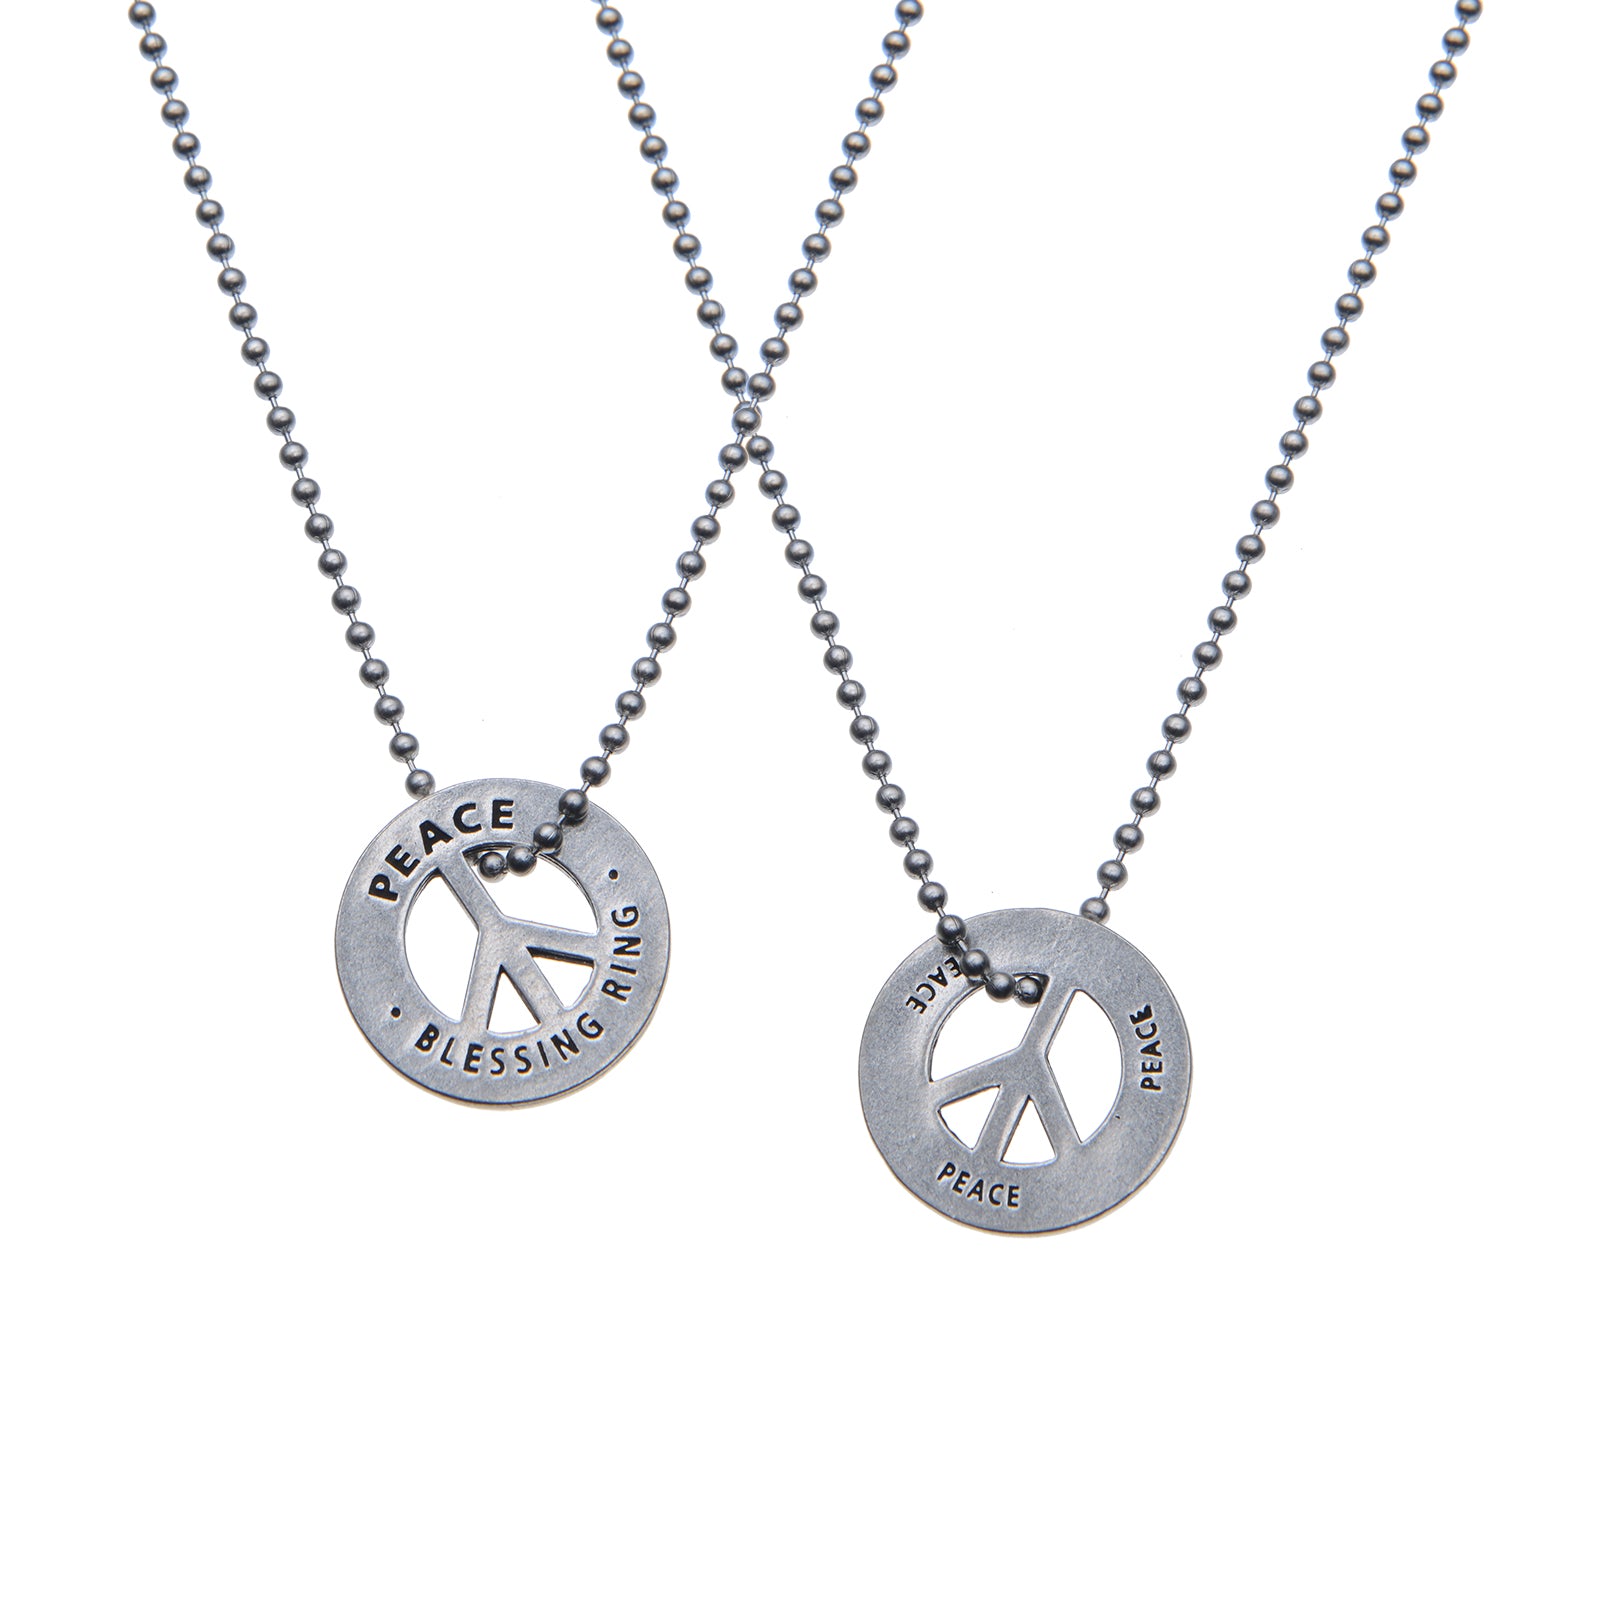 Peace Blessing Rings on a necklace